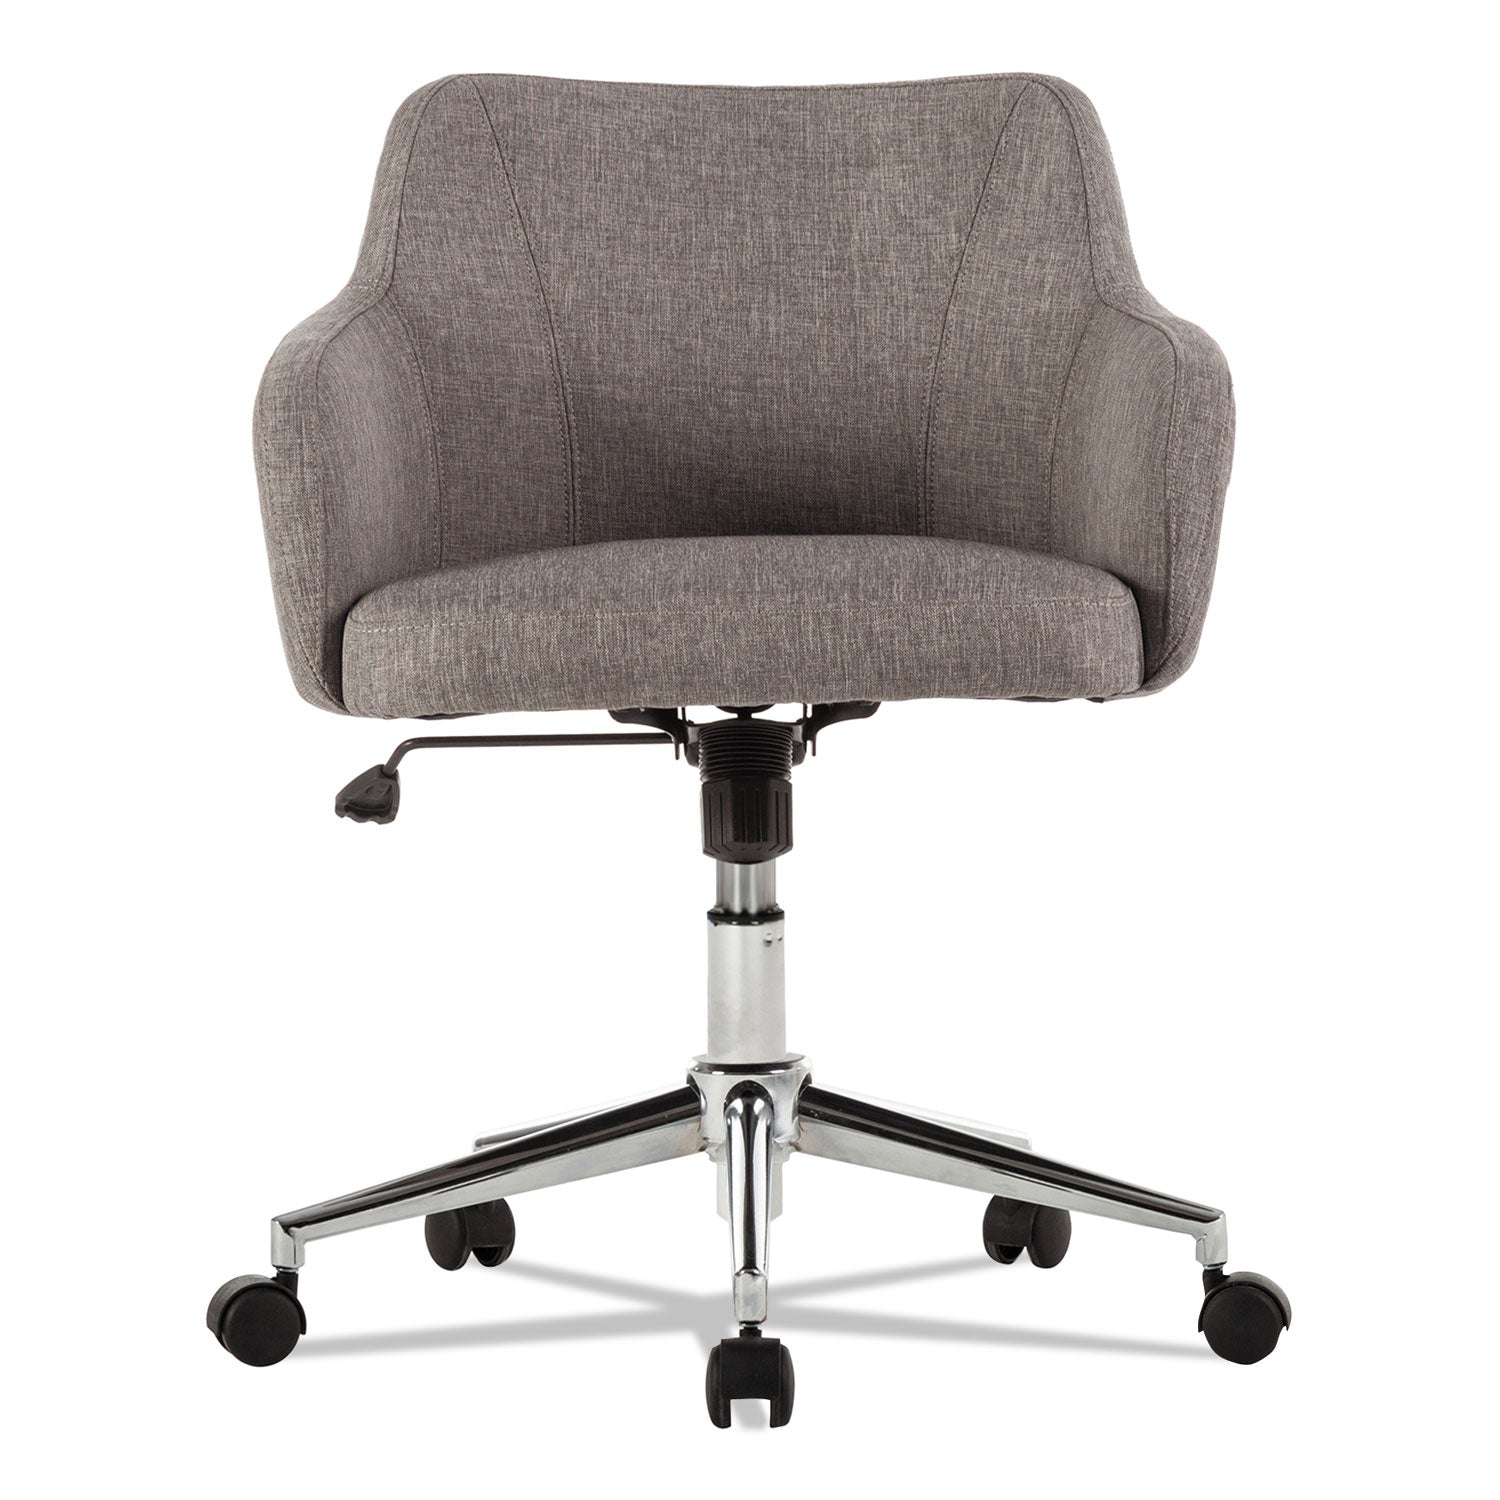 alera-captain-series-mid-back-chair-supports-up-to-275-lb-175-to-205-seat-height-gray-tweed-seat-back-chrome-base_alecs4251 - 2